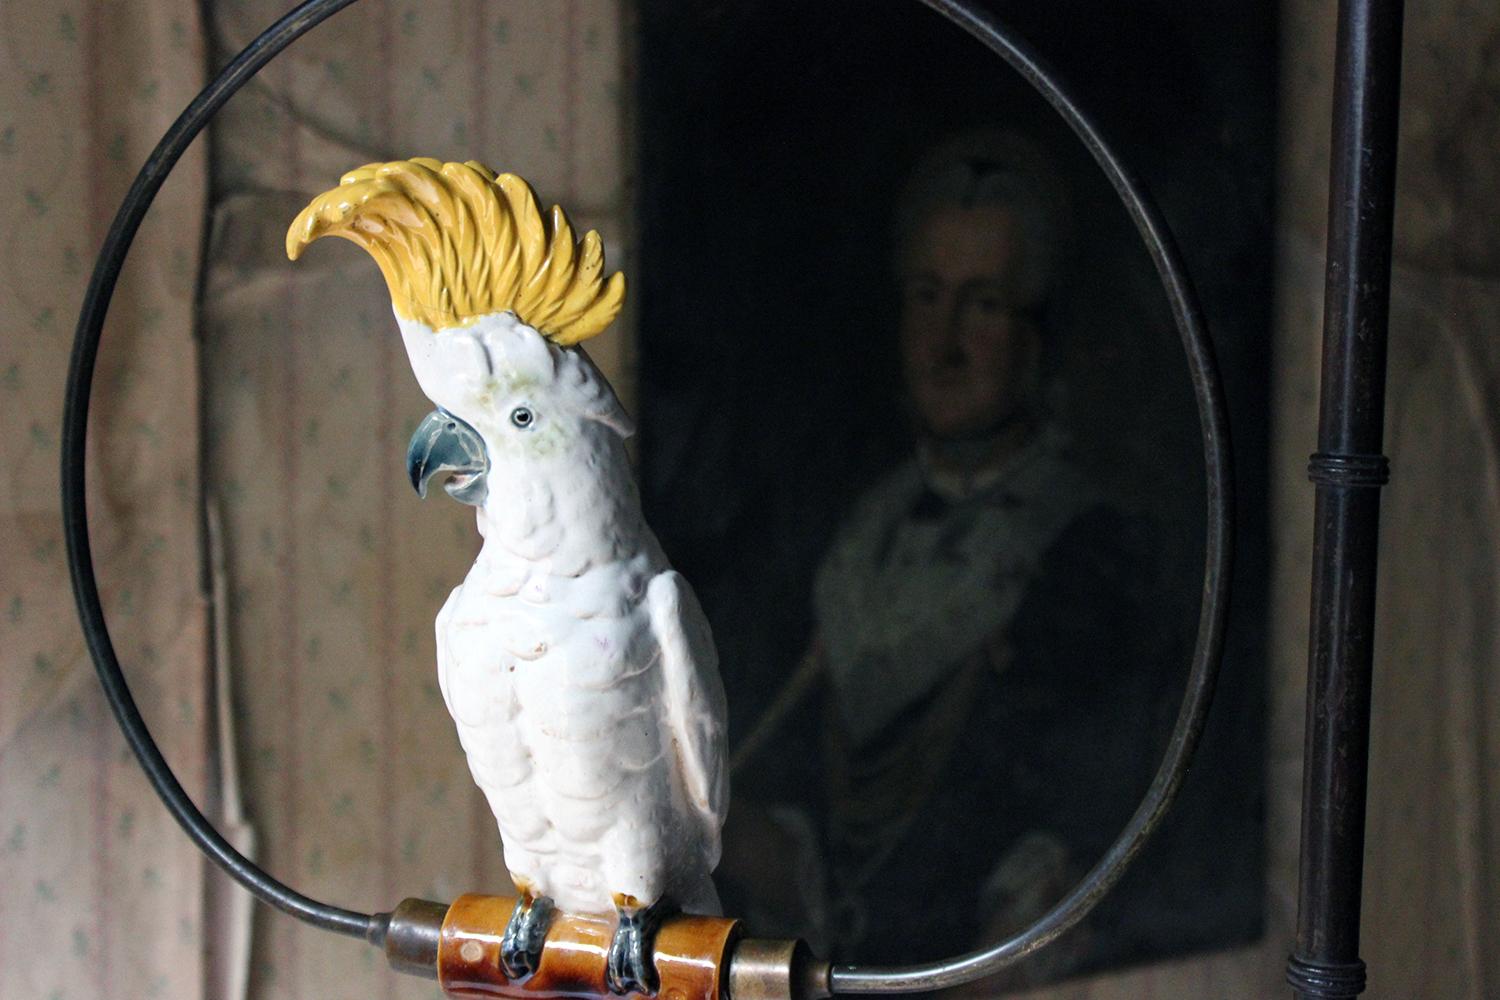 The large floor standing frame, fitted with a late 19th century porcelain Dresden(?) sulphur crested cockatoo, the bird perched within a swinging brass hoop, within an Edwardian period upper frame with finial, the lower Regency period base having a